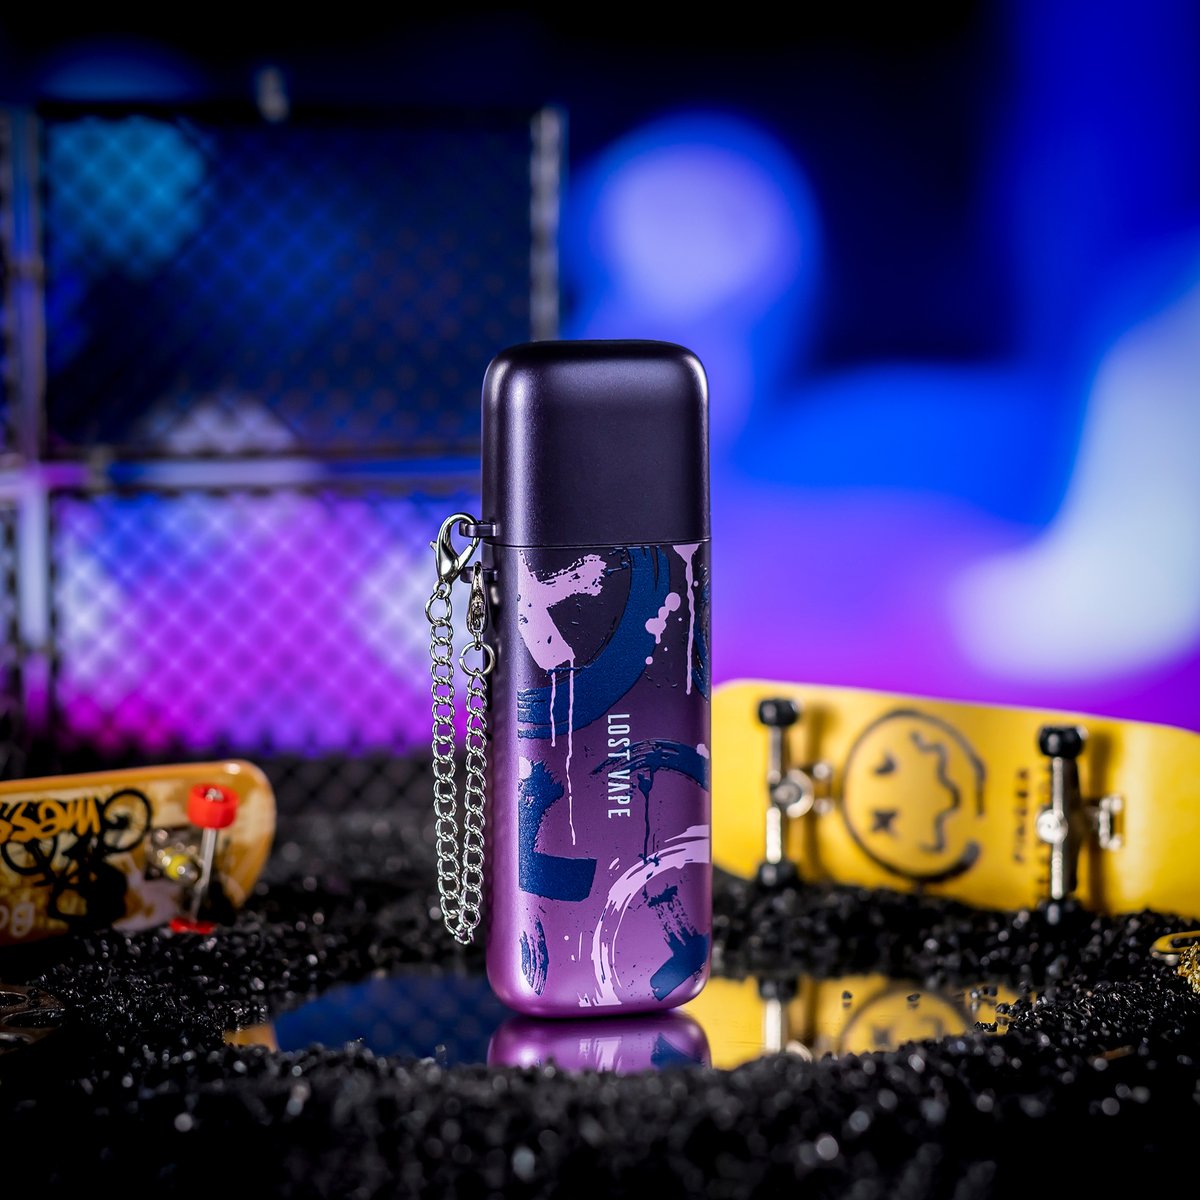 Lost Vape Ursa Cap Pod Kit 😍Built-in 1000mAh battery 😘Fit for Ursa Cartridge V2 🥰Anti-dust cap design ⚠ Warning: The device is used with e-liquid which contains addictive chemical nicotine. For Adult use only. #sourcemore #sourcemoreofficial #Lostvape #Ursacappodkit